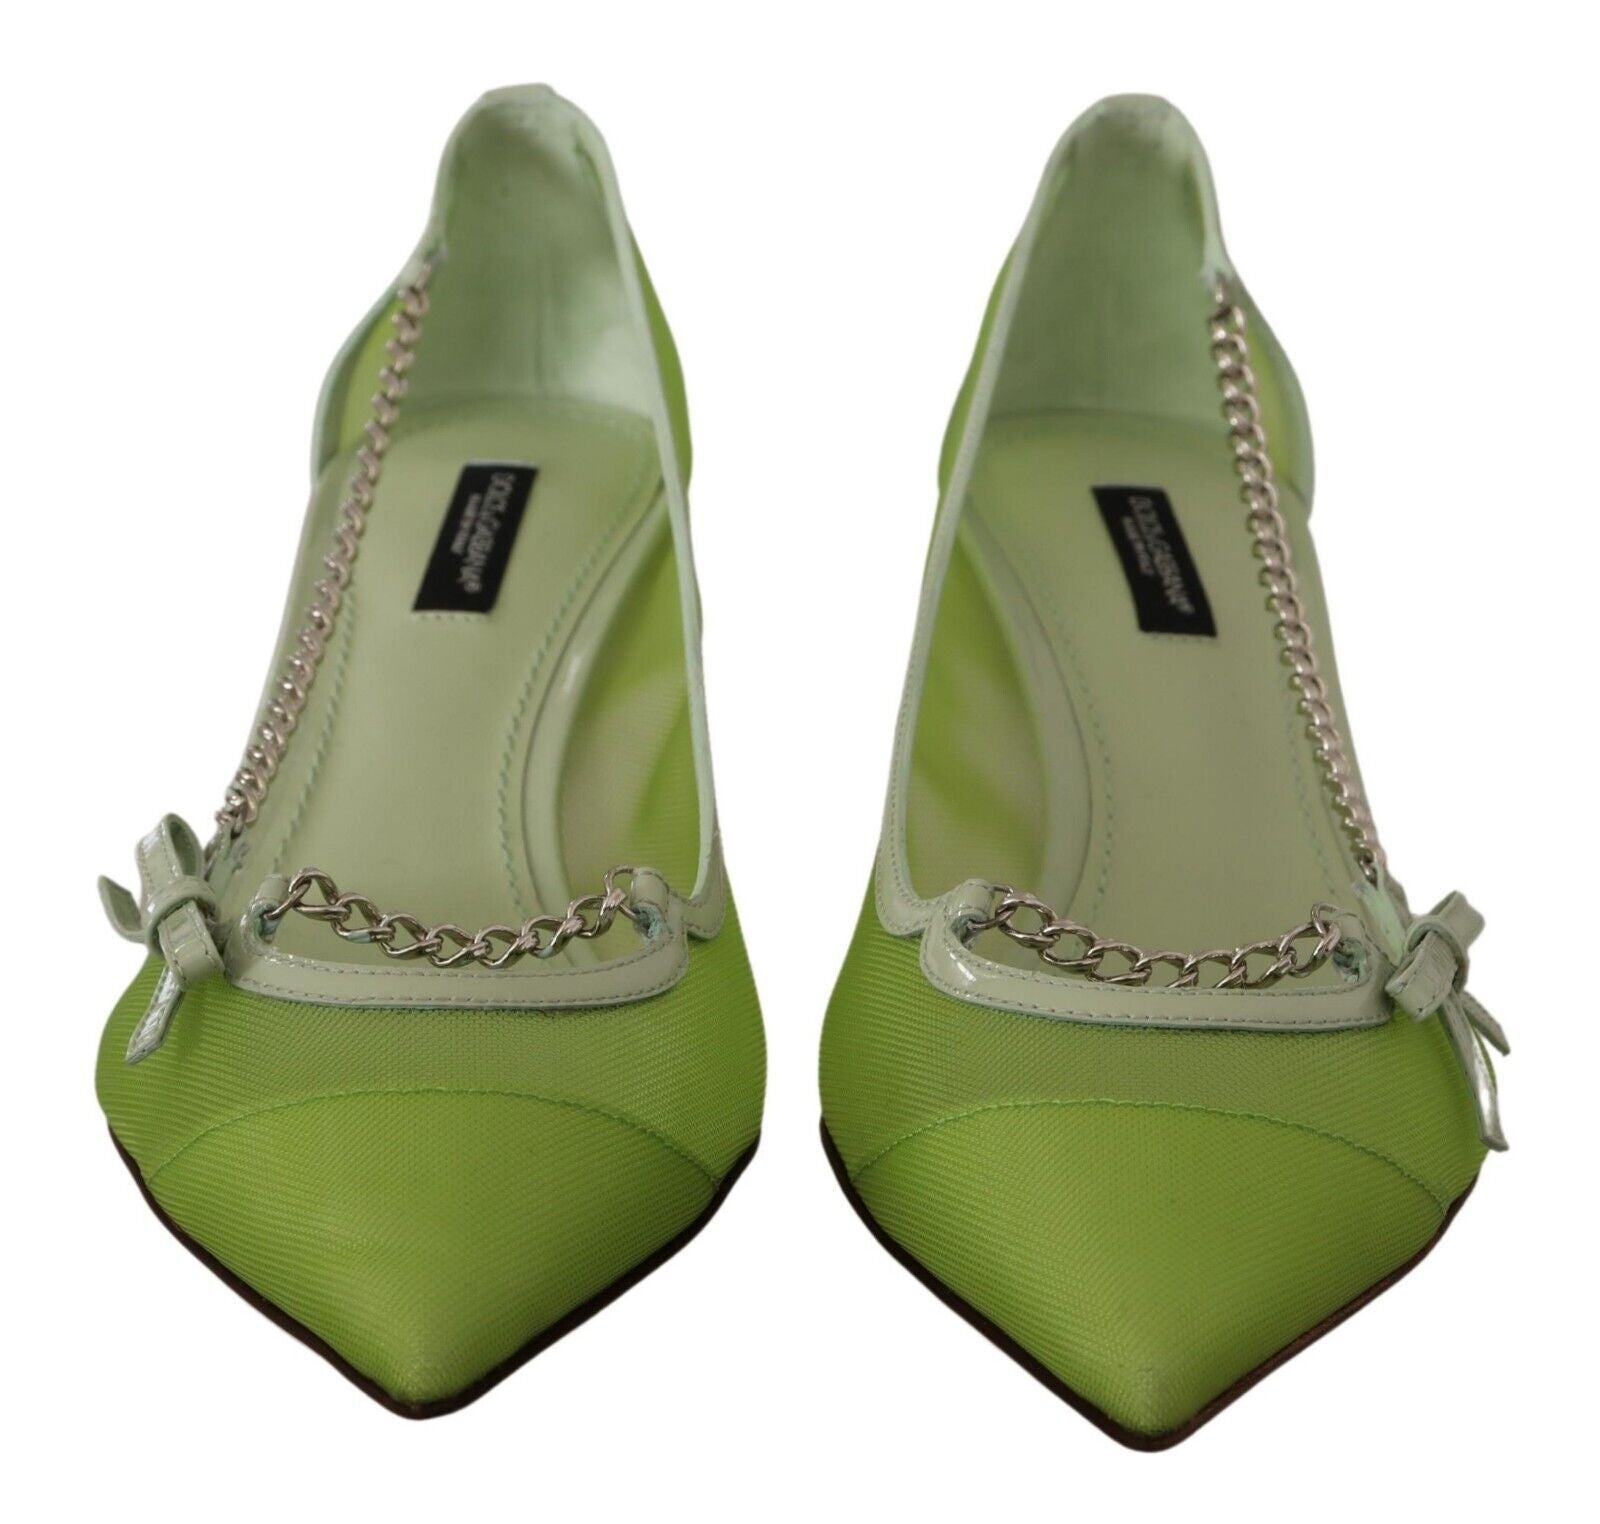 Green Mesh Leather Chains Heels Pumps Shoes